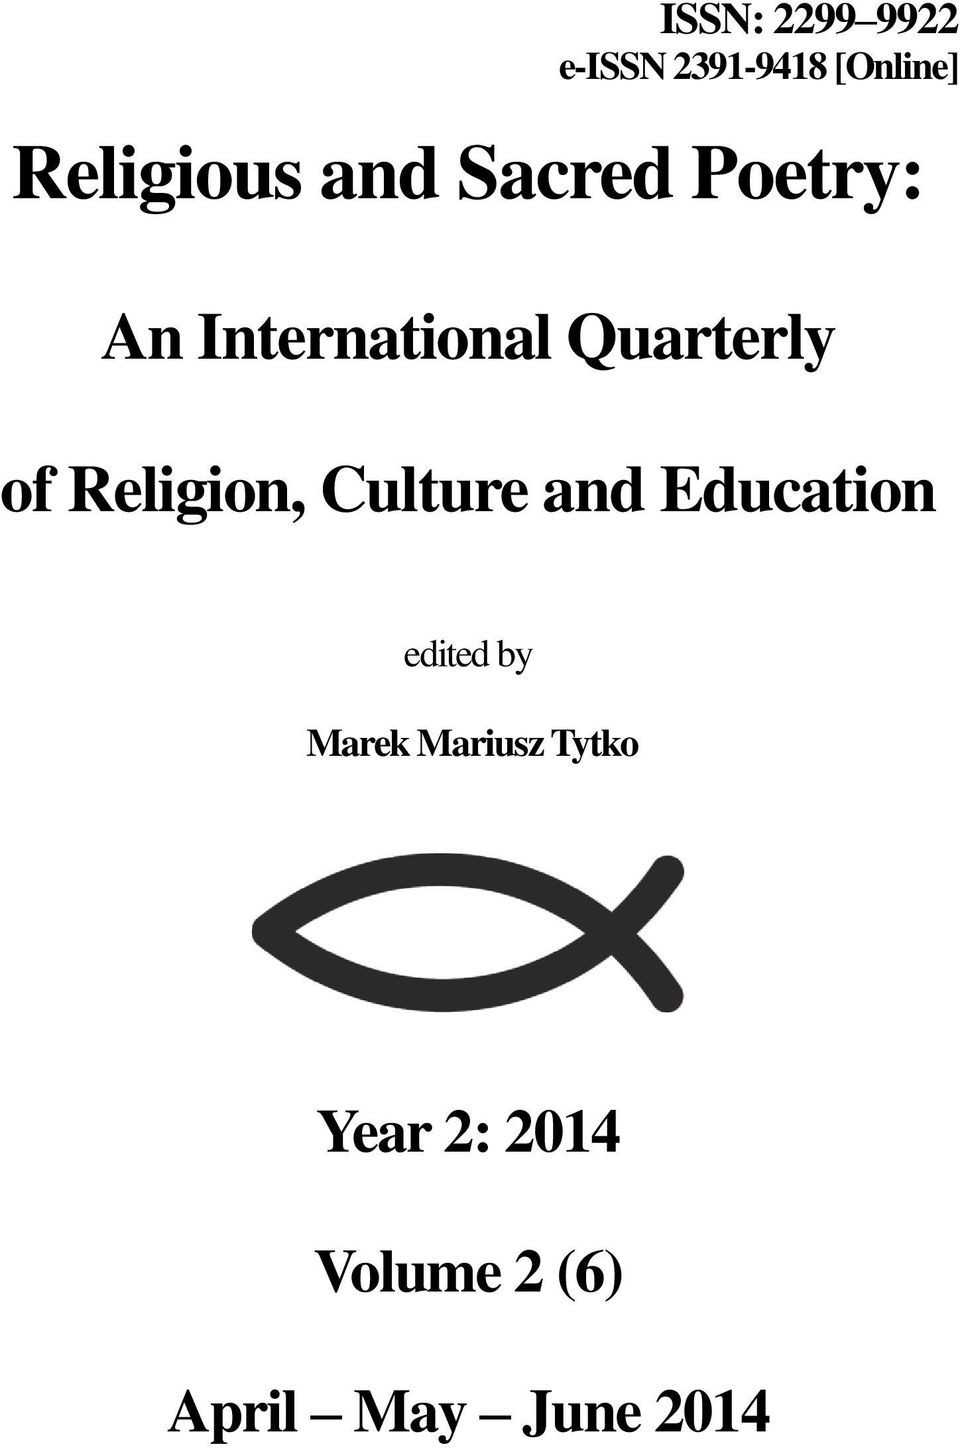 Religion, Culture and Education edited by Marek